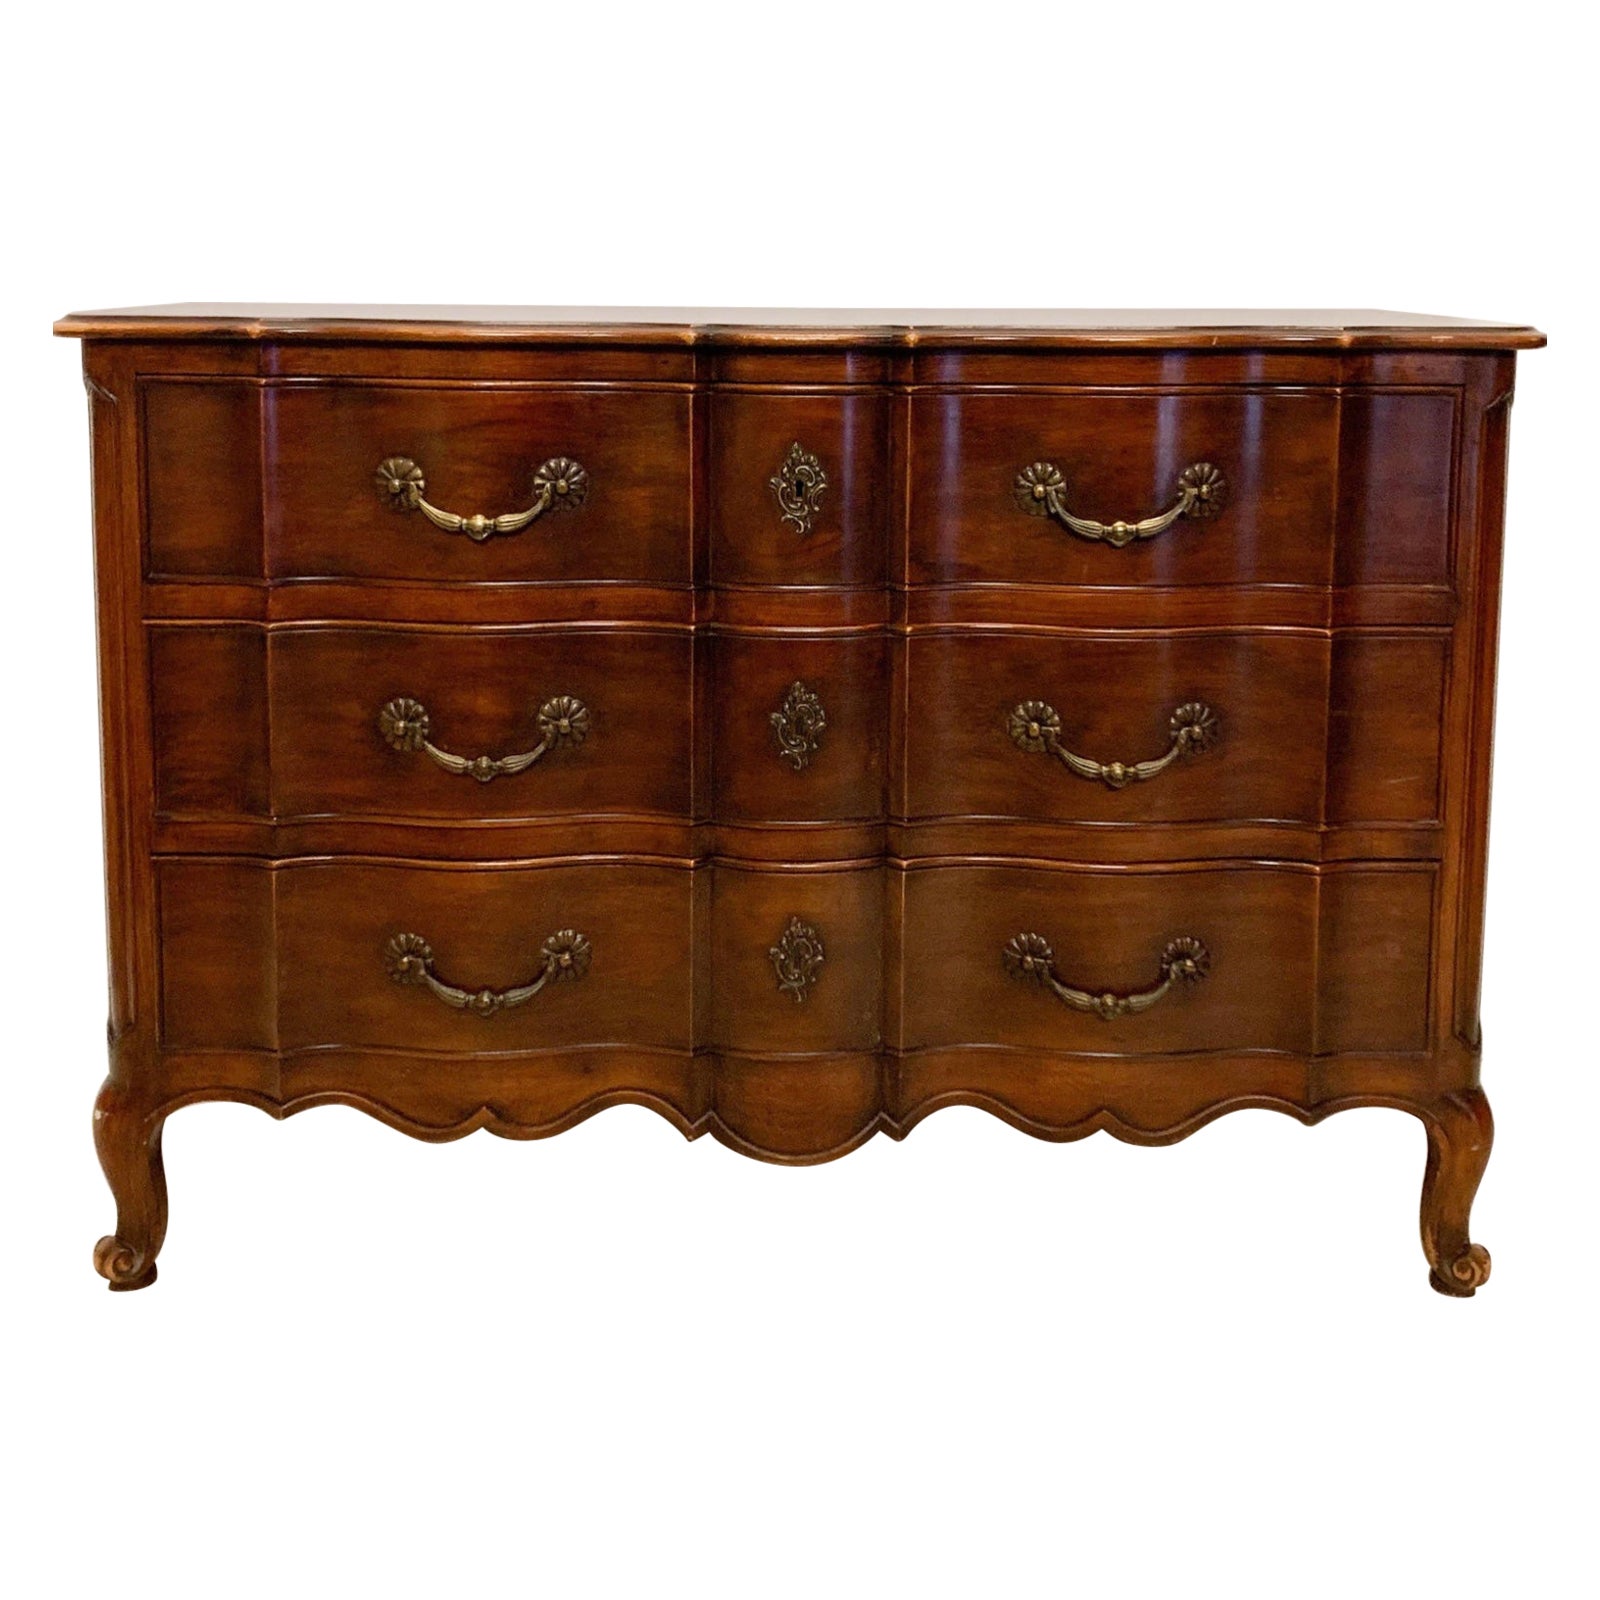 French Louis XIV Style Carved Mahogany Chest / Commode by John Widdicomb